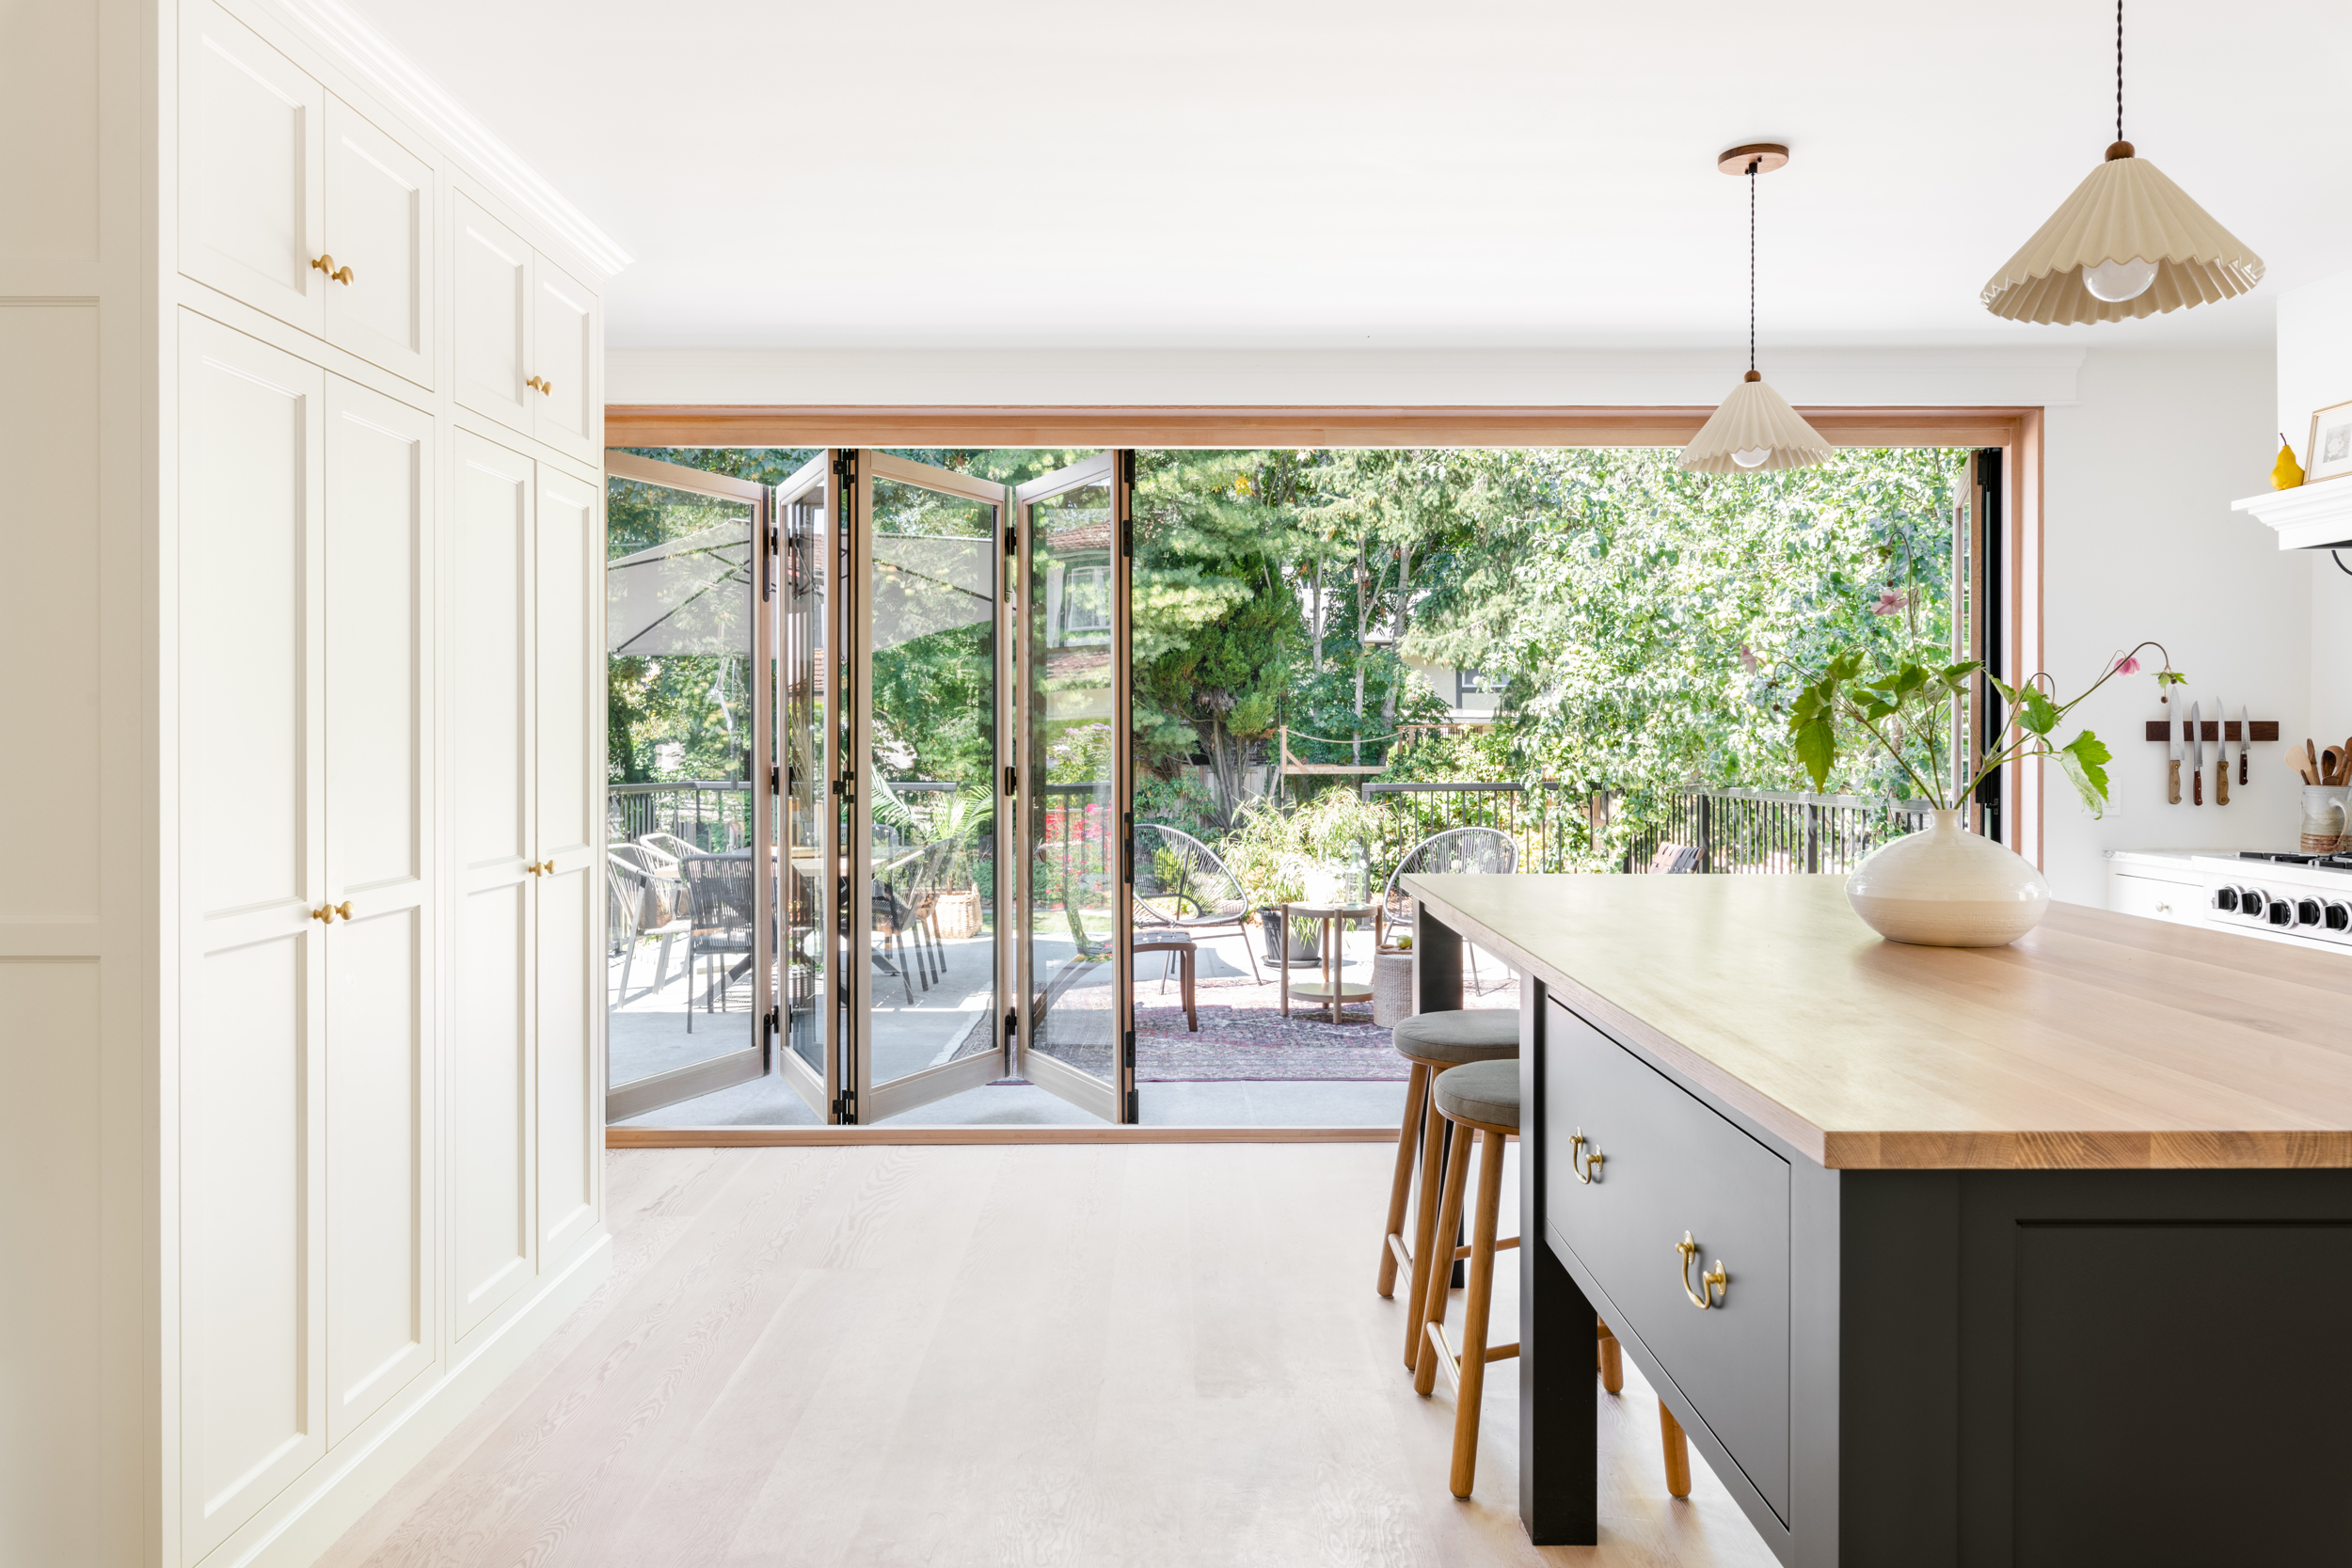 Kitchen of modern home opens onto patio with glass accordion door